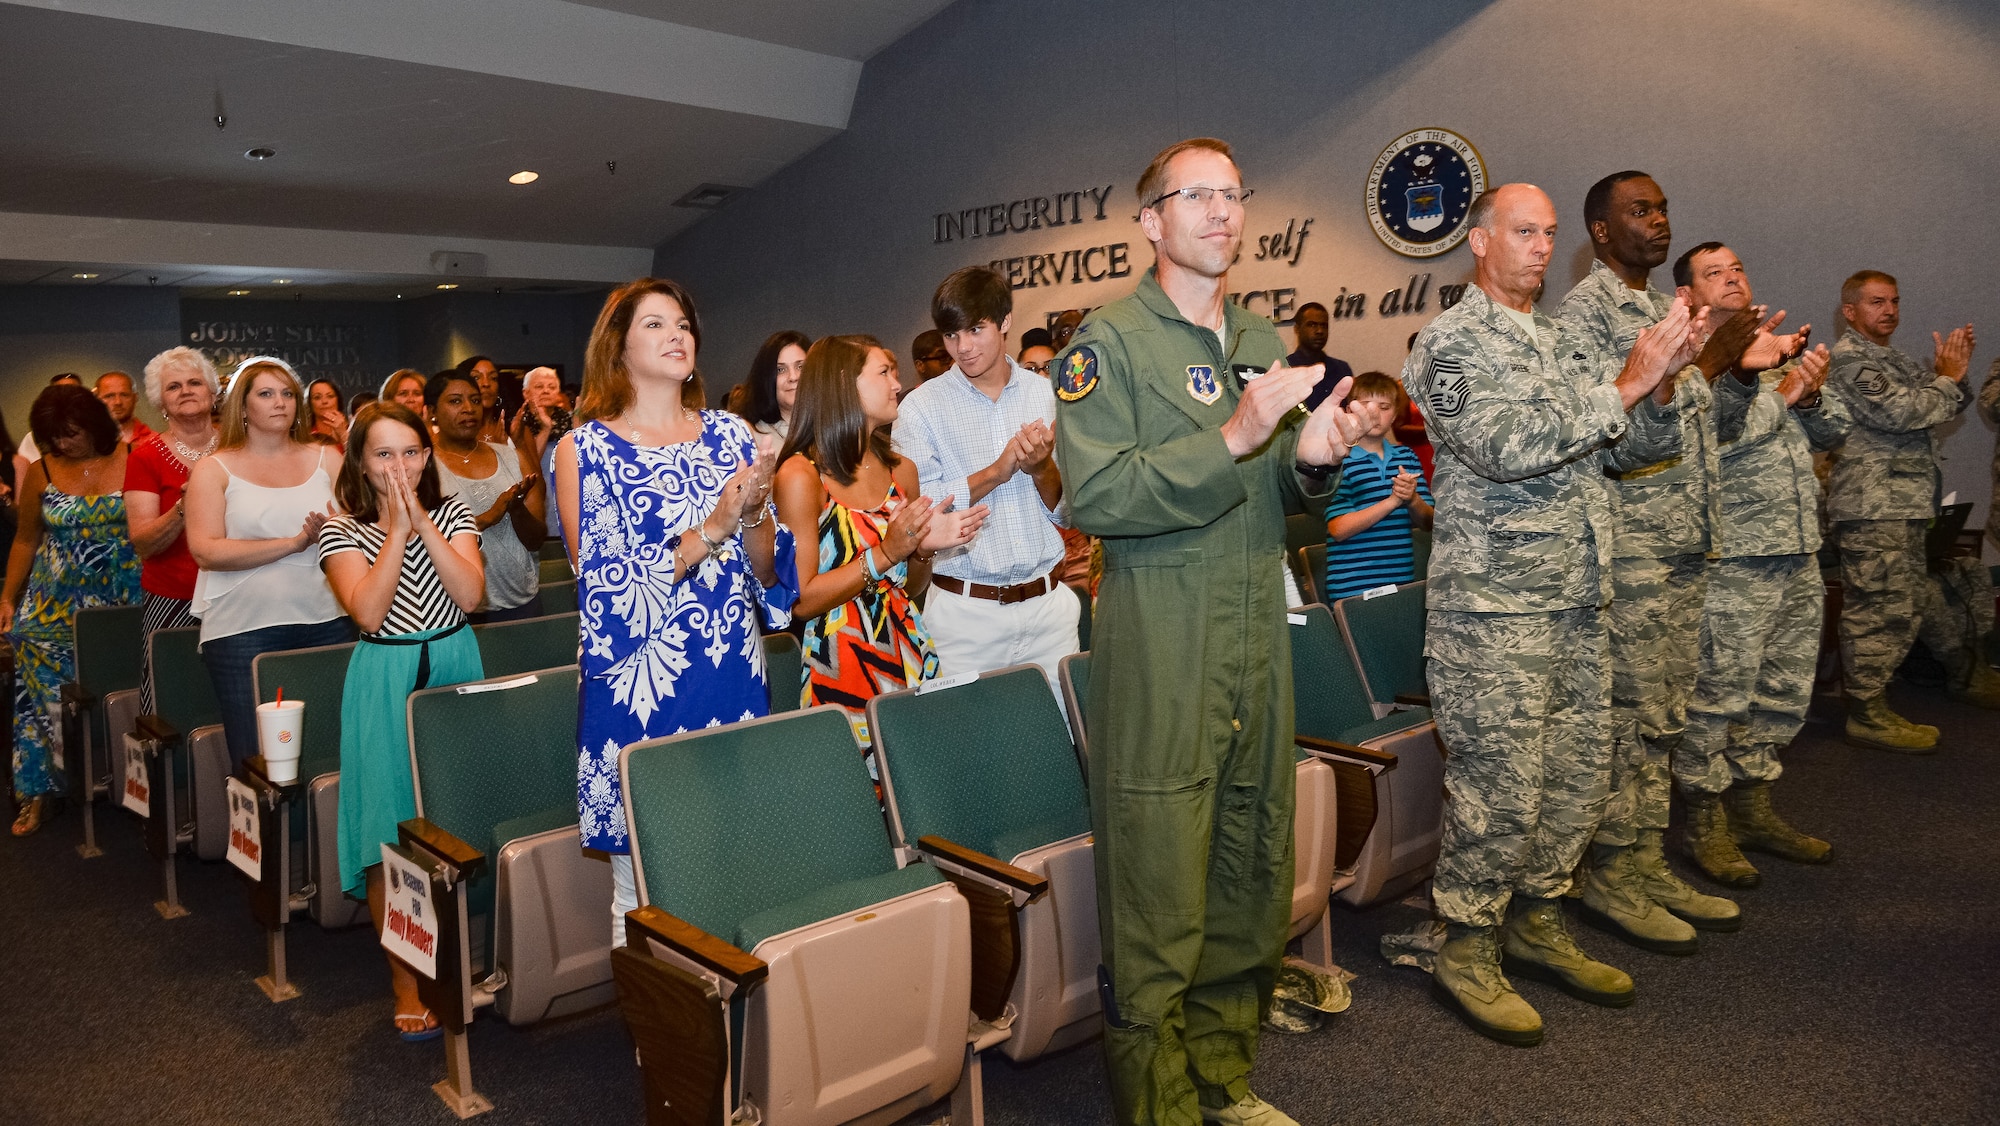 Family members, friends and coworkers cheer on members of the 202nd Engineering Installation Squadron (EIS), during a Hometown Heroes Salute ceremony at Robins Air Force Base, Ga., July 13, 2014. 
Members of the 202nd EIS received numerous awards to include Bronze Star Medals, Air Force and Army Commendation and Achievement Medals and Hometown Heroes Awards for meritorious service while deployed in support of the global war on terrorism.   (U.S. Air National Guard photo by Master Sgt. Roger Parsons/Released)  
